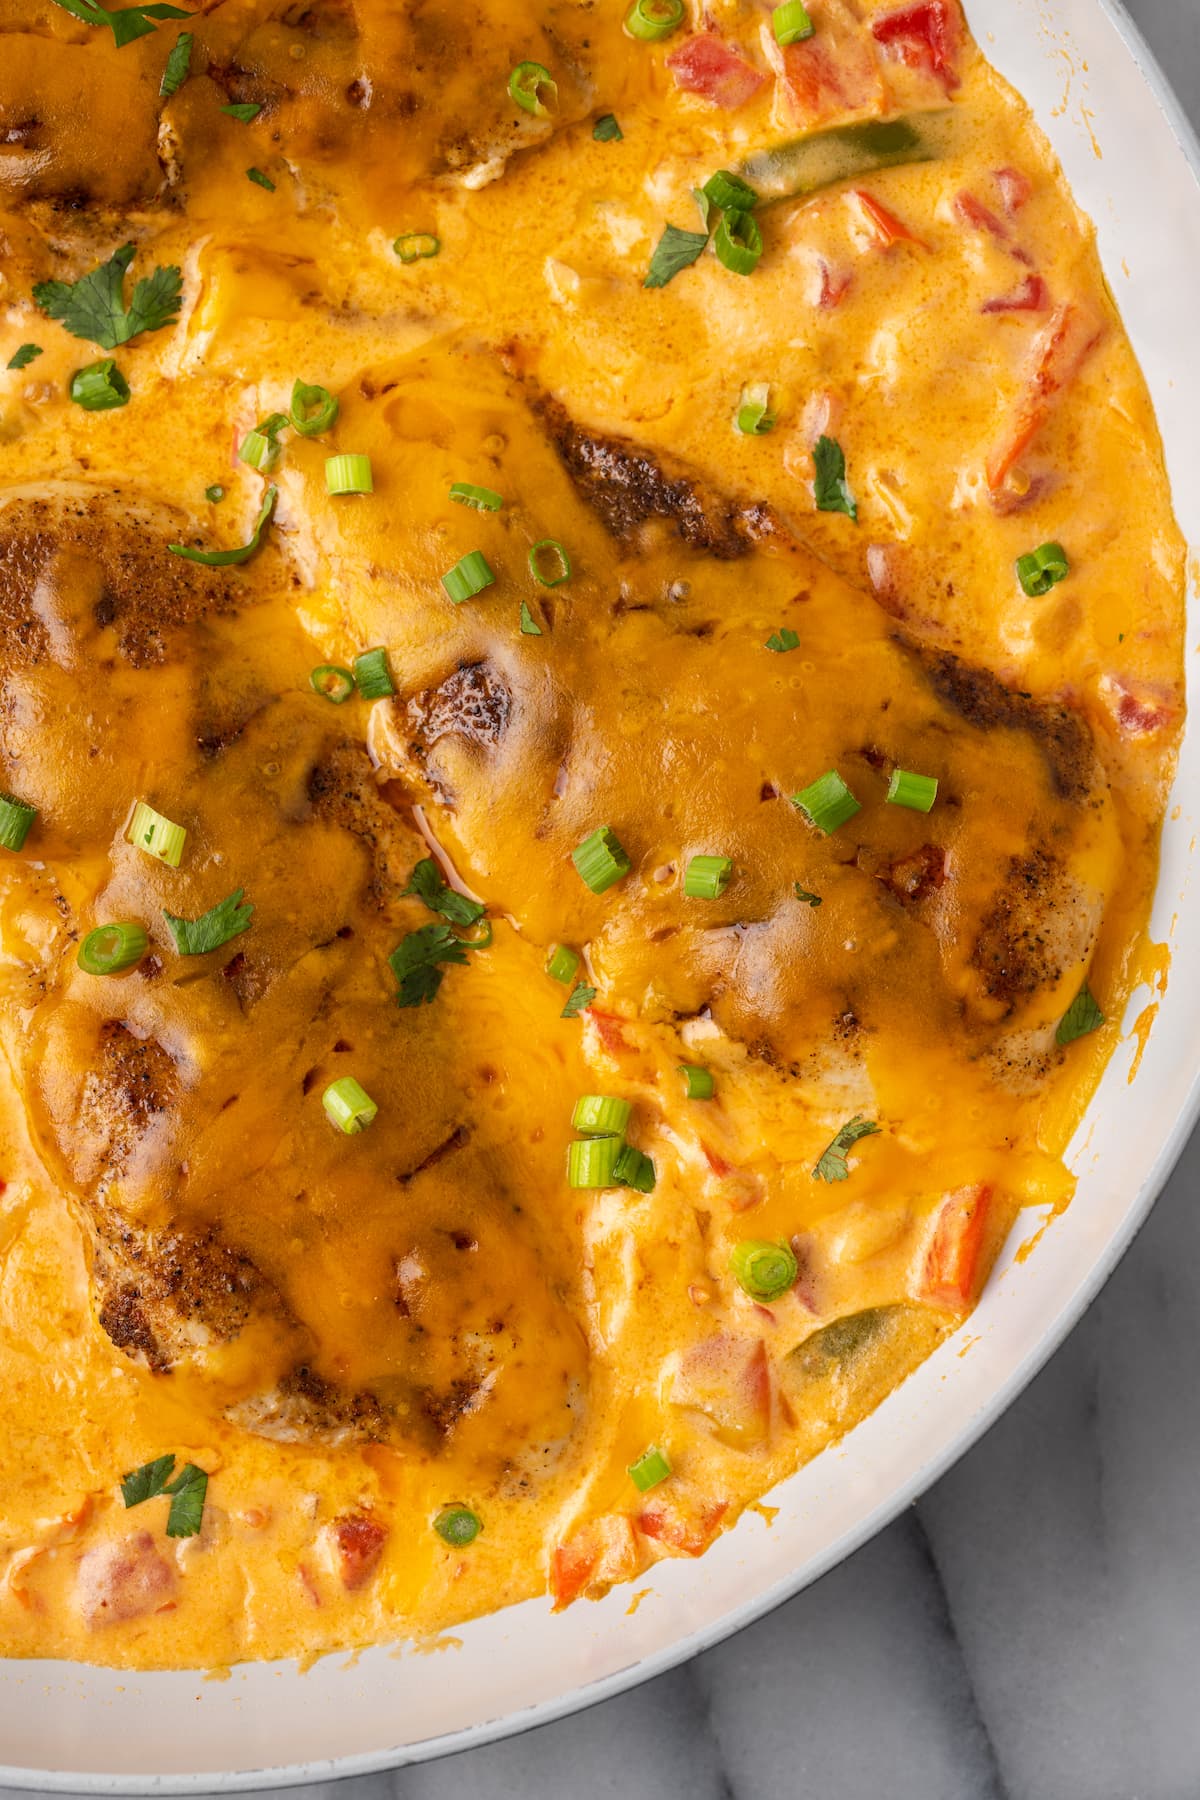 This Santa Fe Chicken is a one-pan recipe packed with your favorite southwestern flavors. Juicy seasoned chicken is paired with peppers, onions, and tomatoes in a creamy, cheesy sauce!